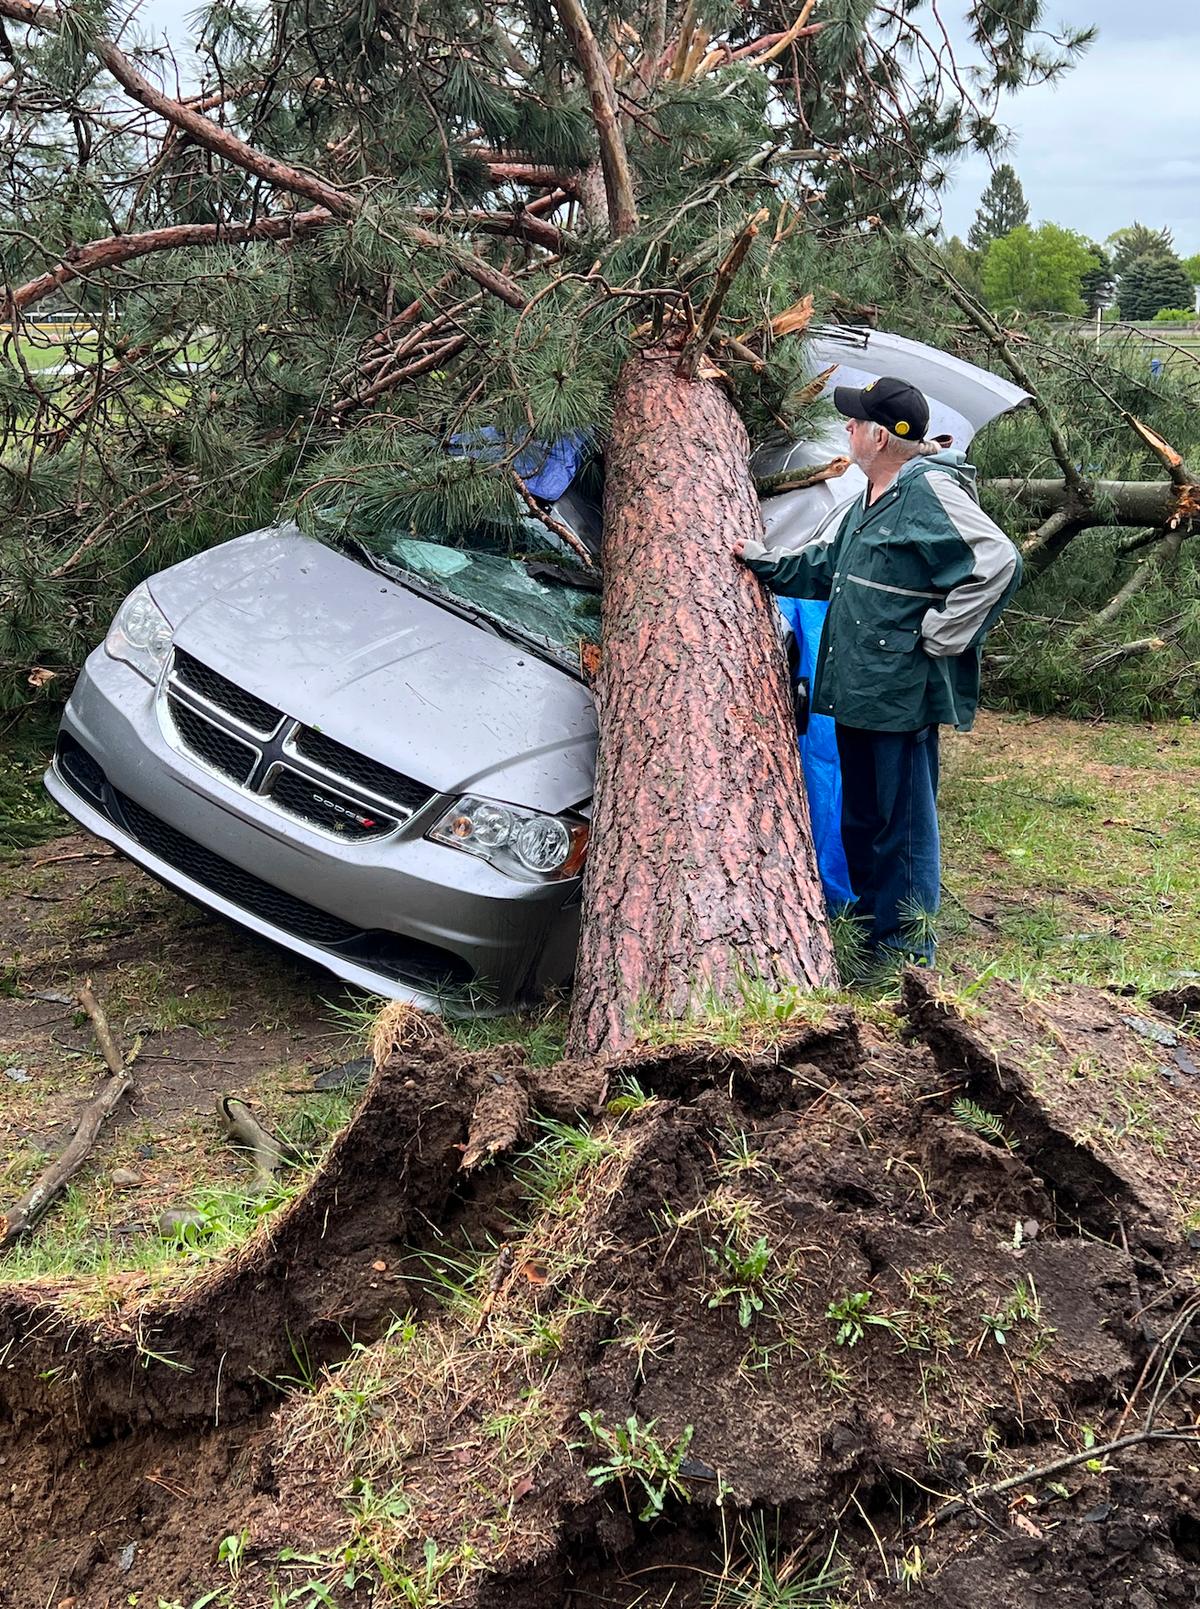 Jack Elliott inspects his 2017 Dodge in Gaylord, Mich., on May 20, 2022, after a red pine crushed the vehicle during a tornado. (John Russell/AP Photo)